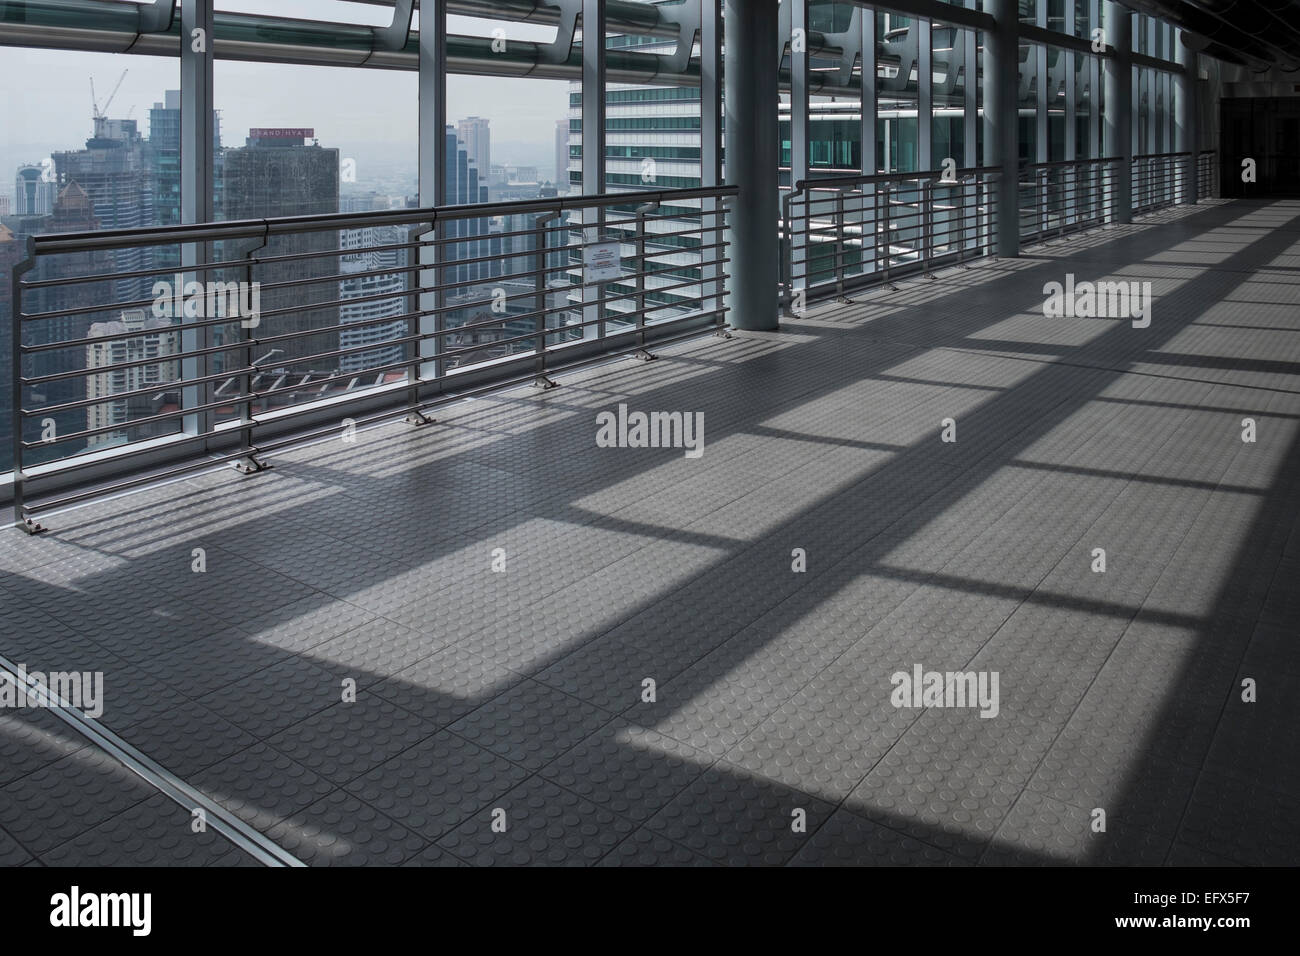 On the bridge between the two towers at the Petronas tower building in Kuala Lumpur, Malaysia. Stock Photo